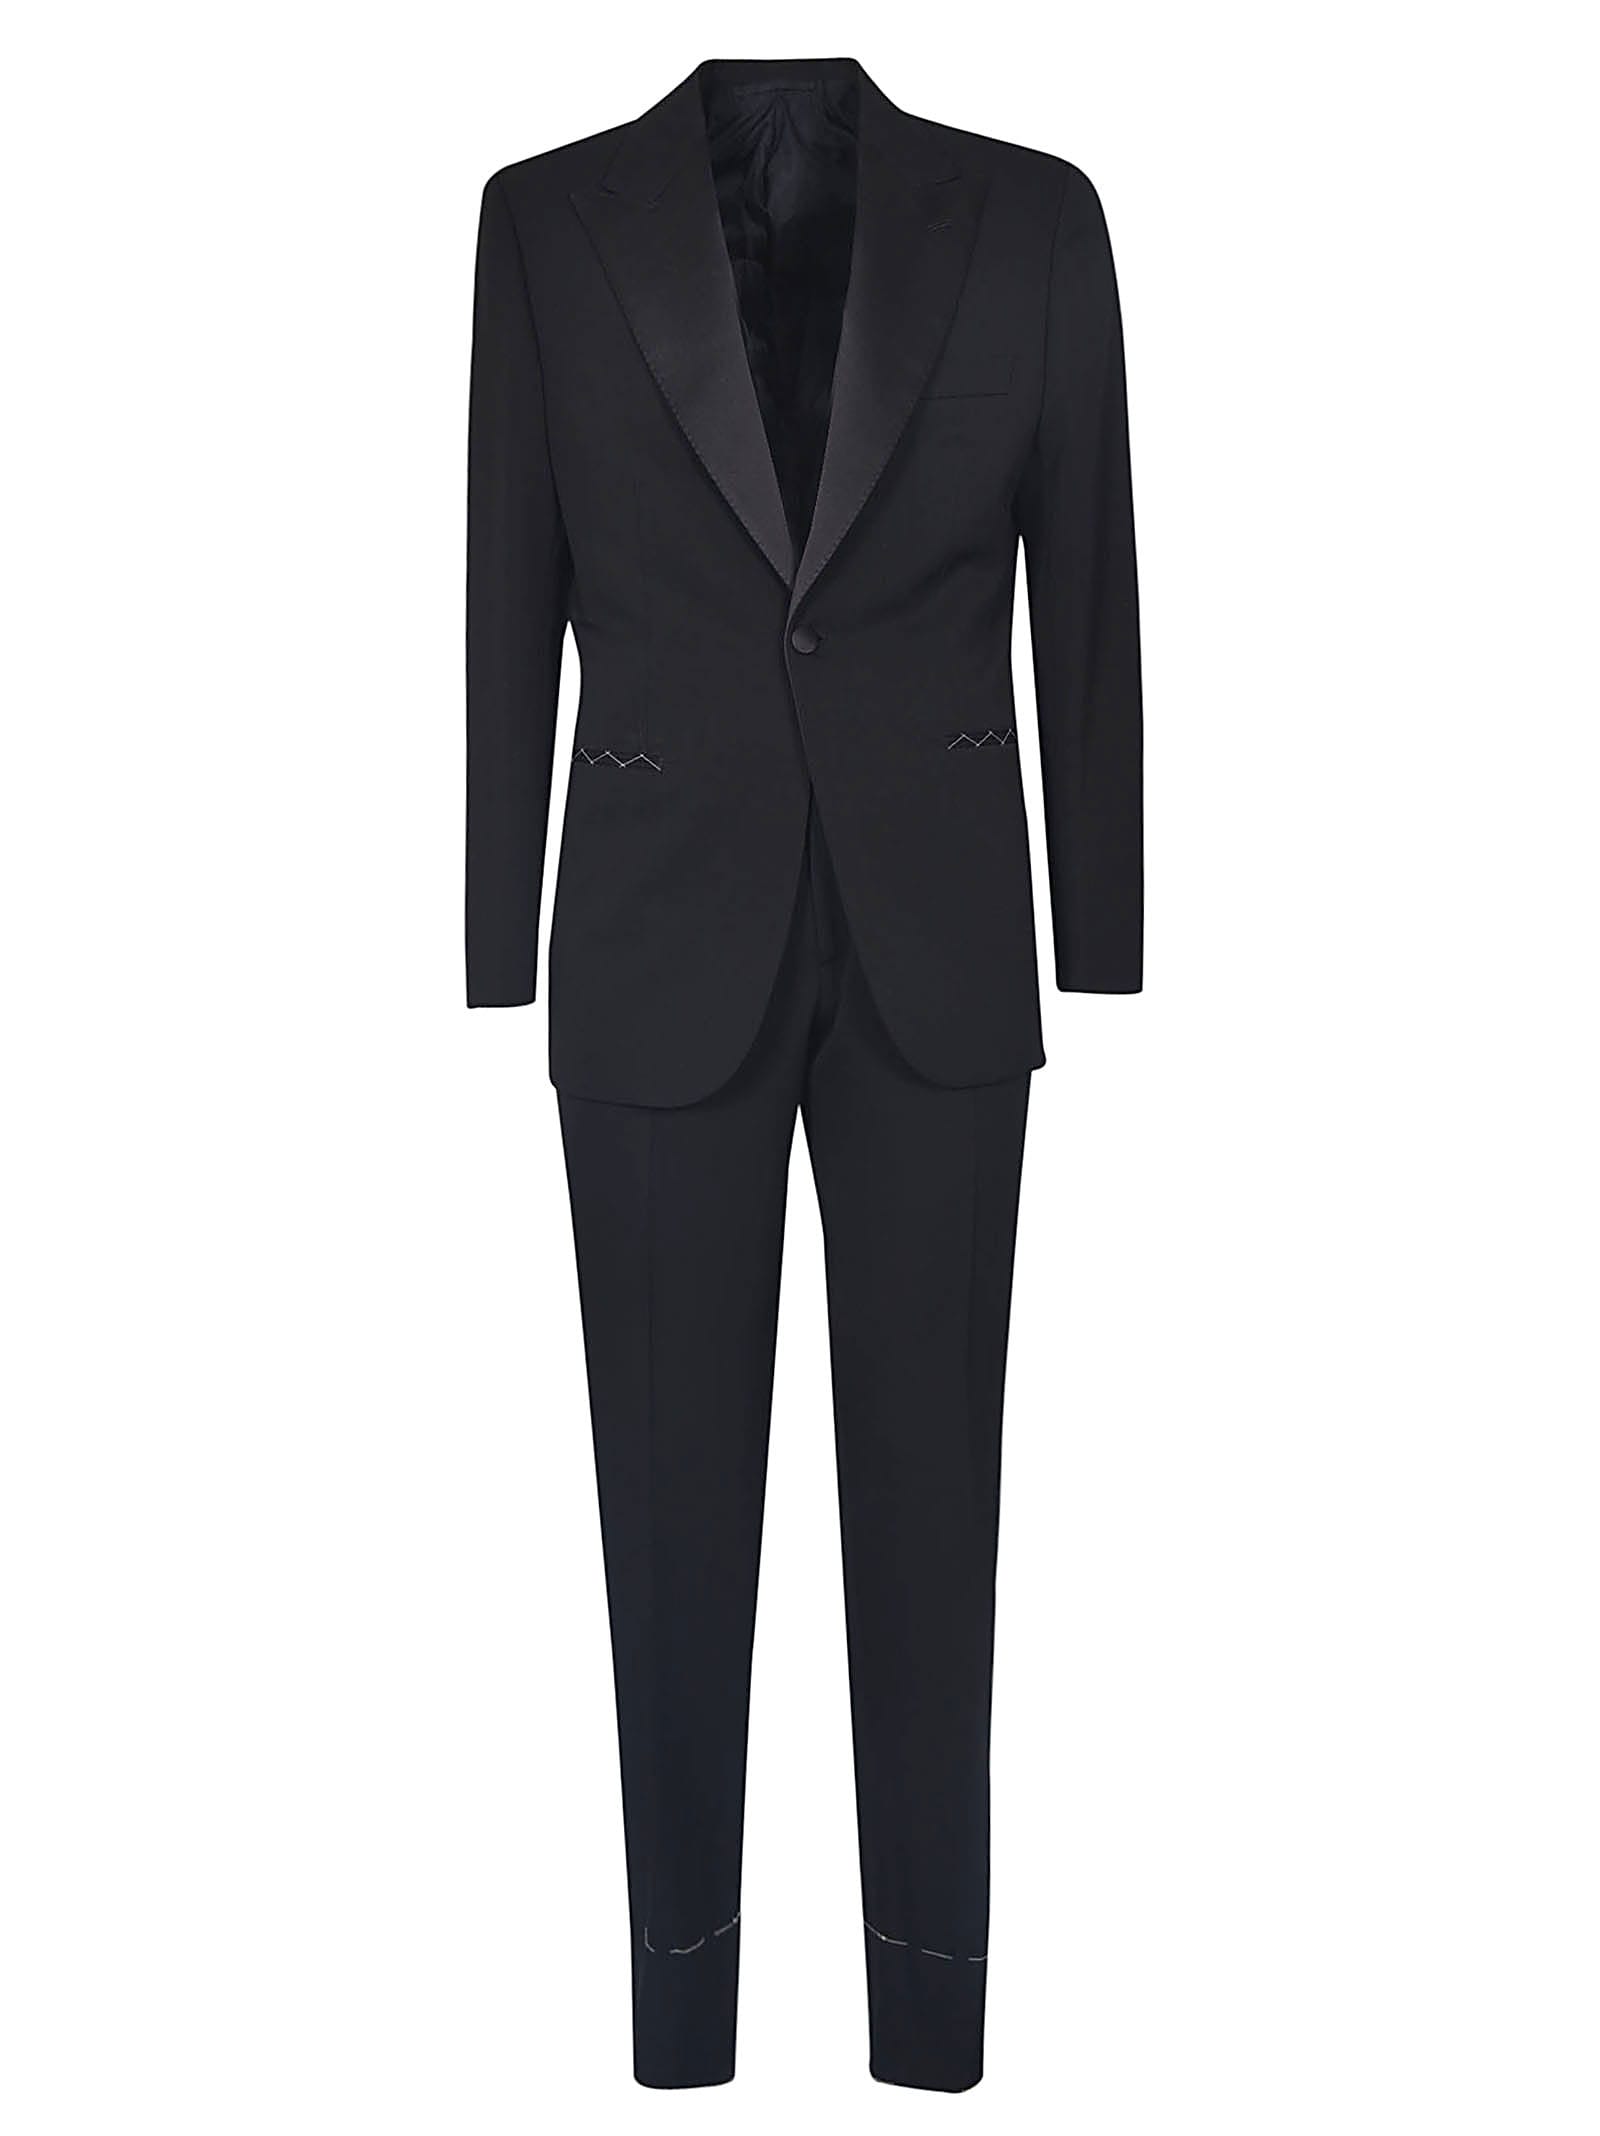 Brioni Single-Breasted Suit